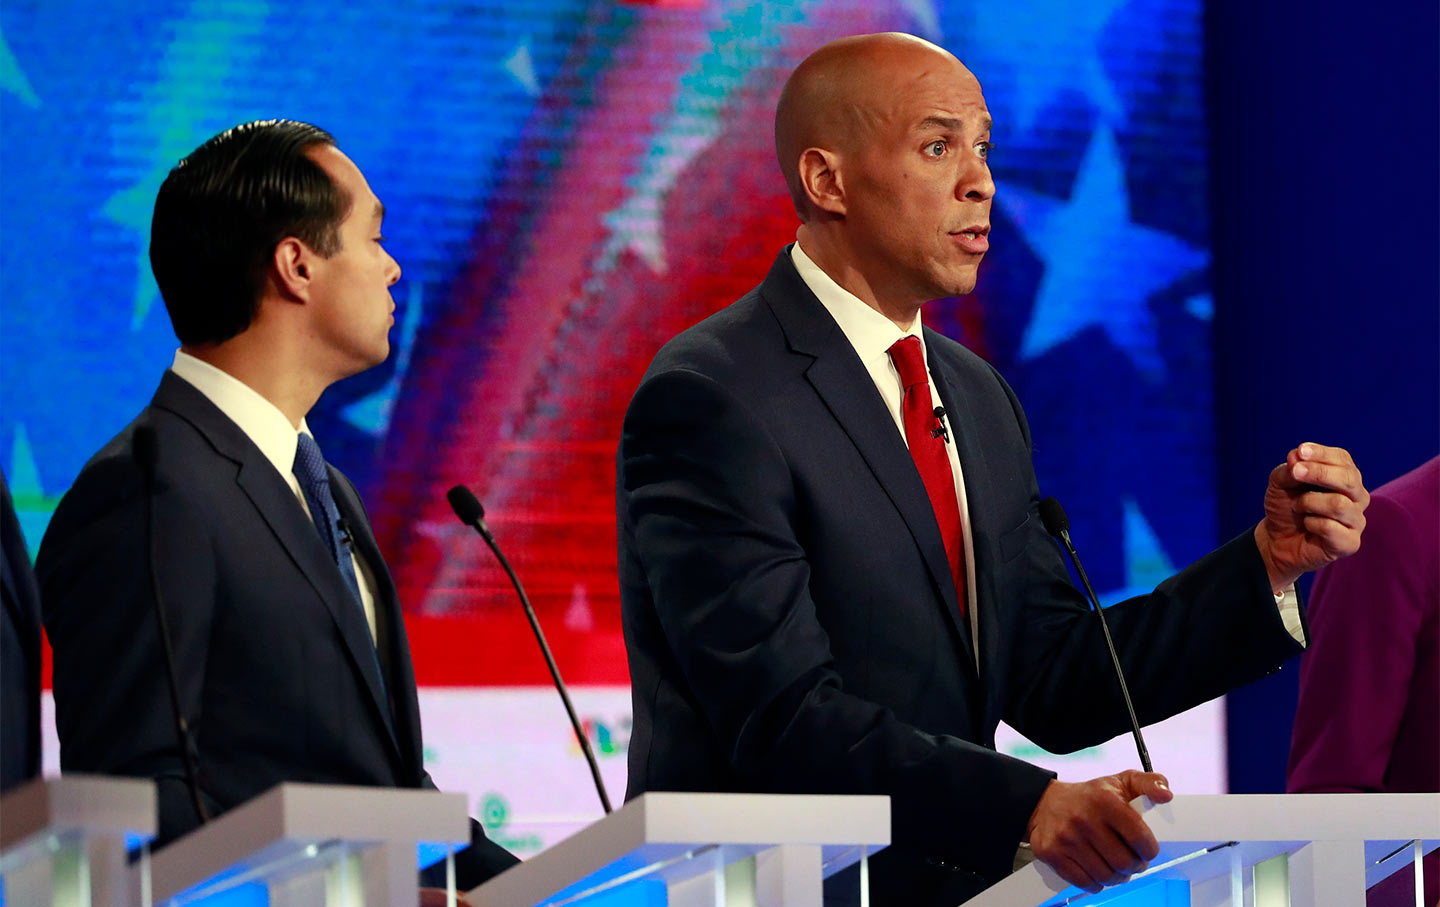 The DNC’s Bad Rules Are Mangling the 2020 Race by Excluding Diverse Voices From the Debates